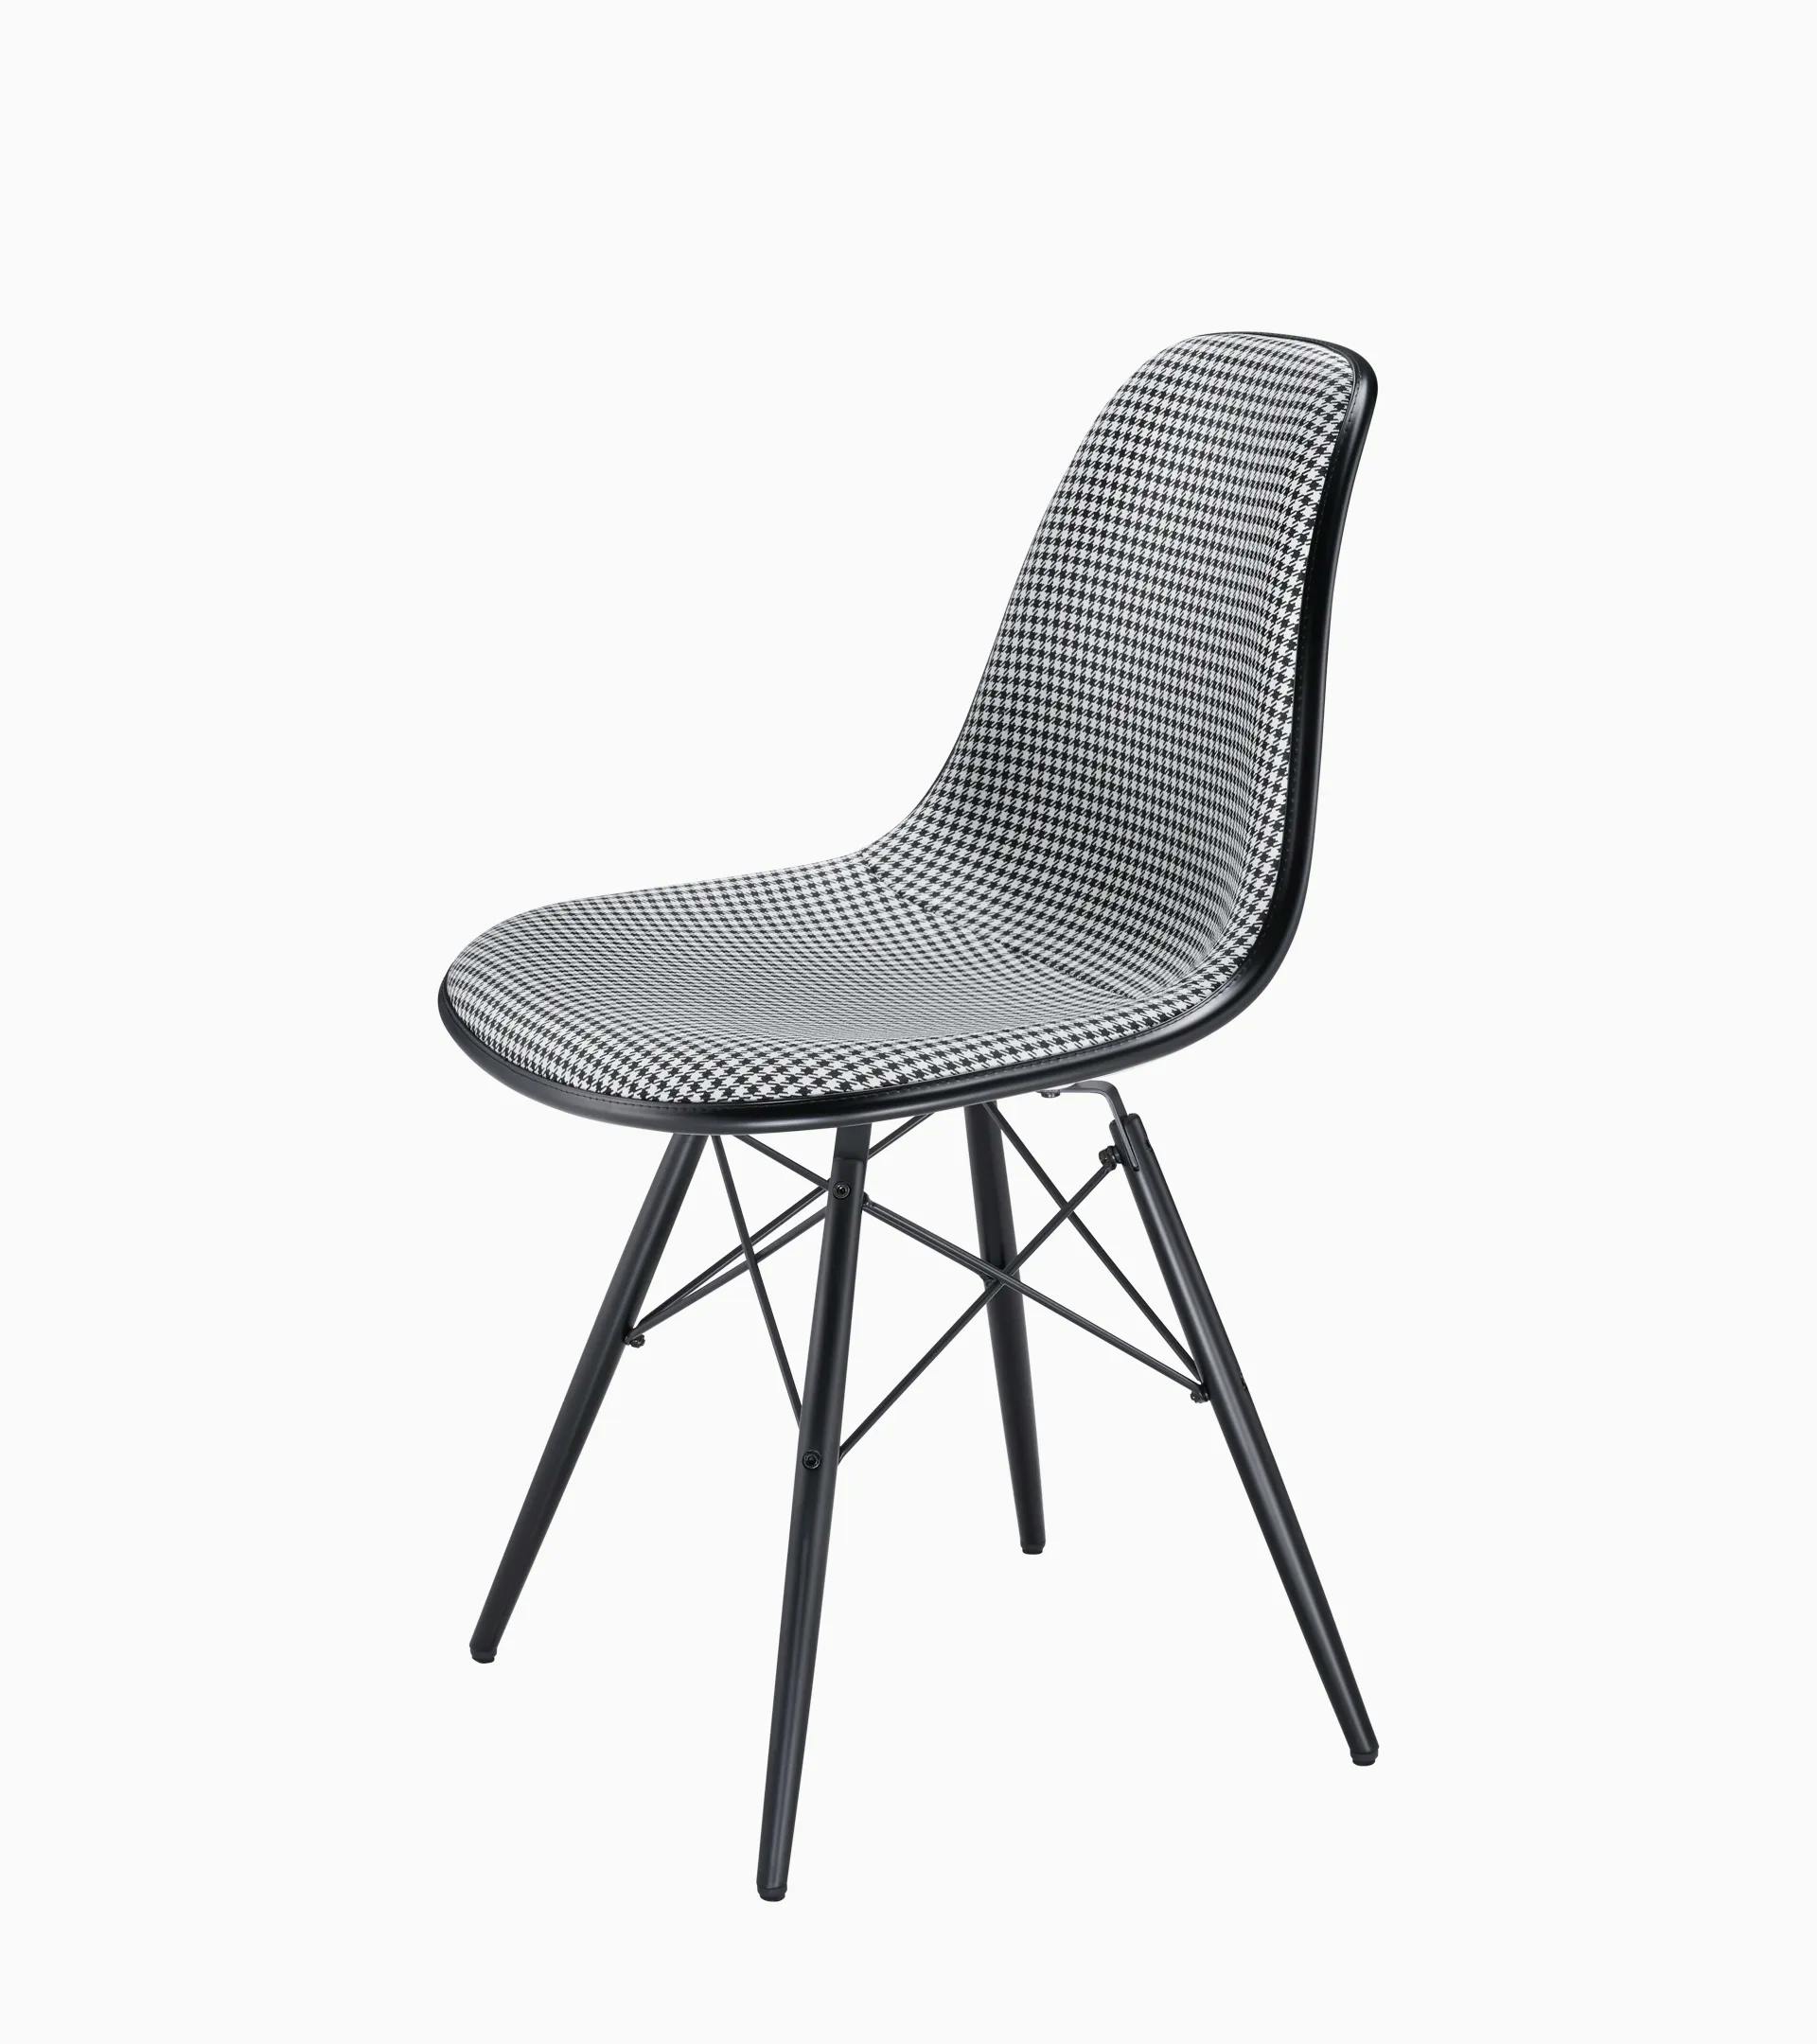 Eames Plastic Side Chair Pepita Edition – Limited Edition 2